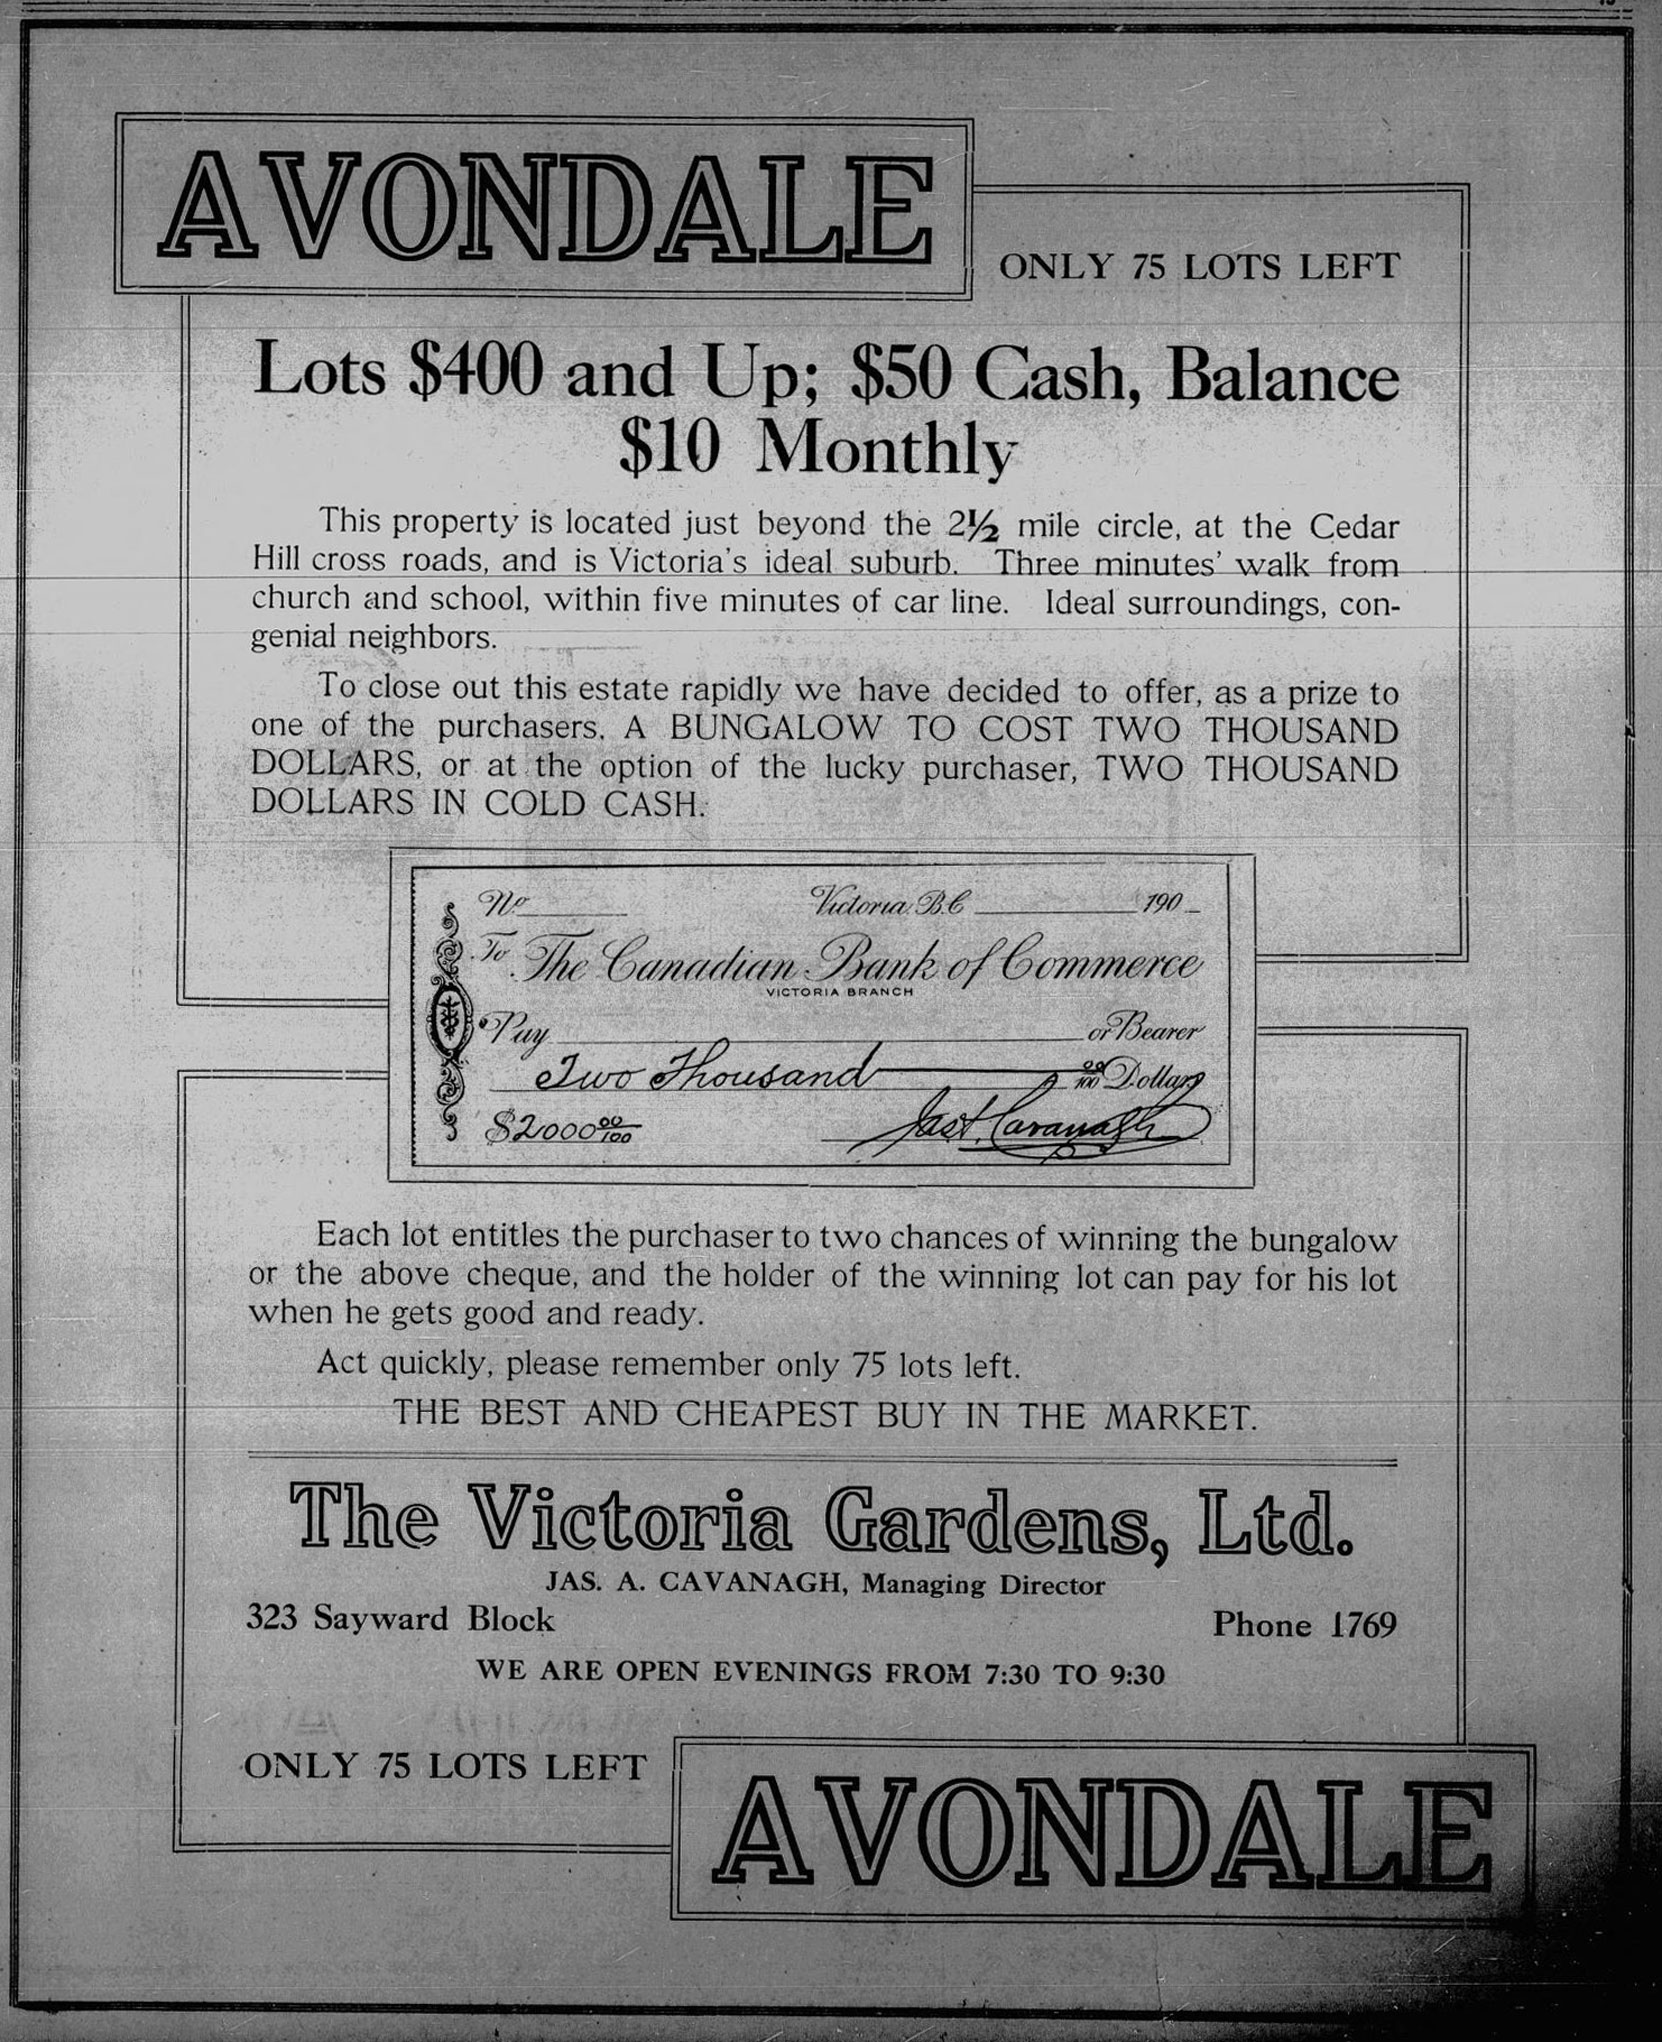 1912 advertisement for the then newly developed Avondale subdivision, off what is now Henderson Road in Oak Bay.